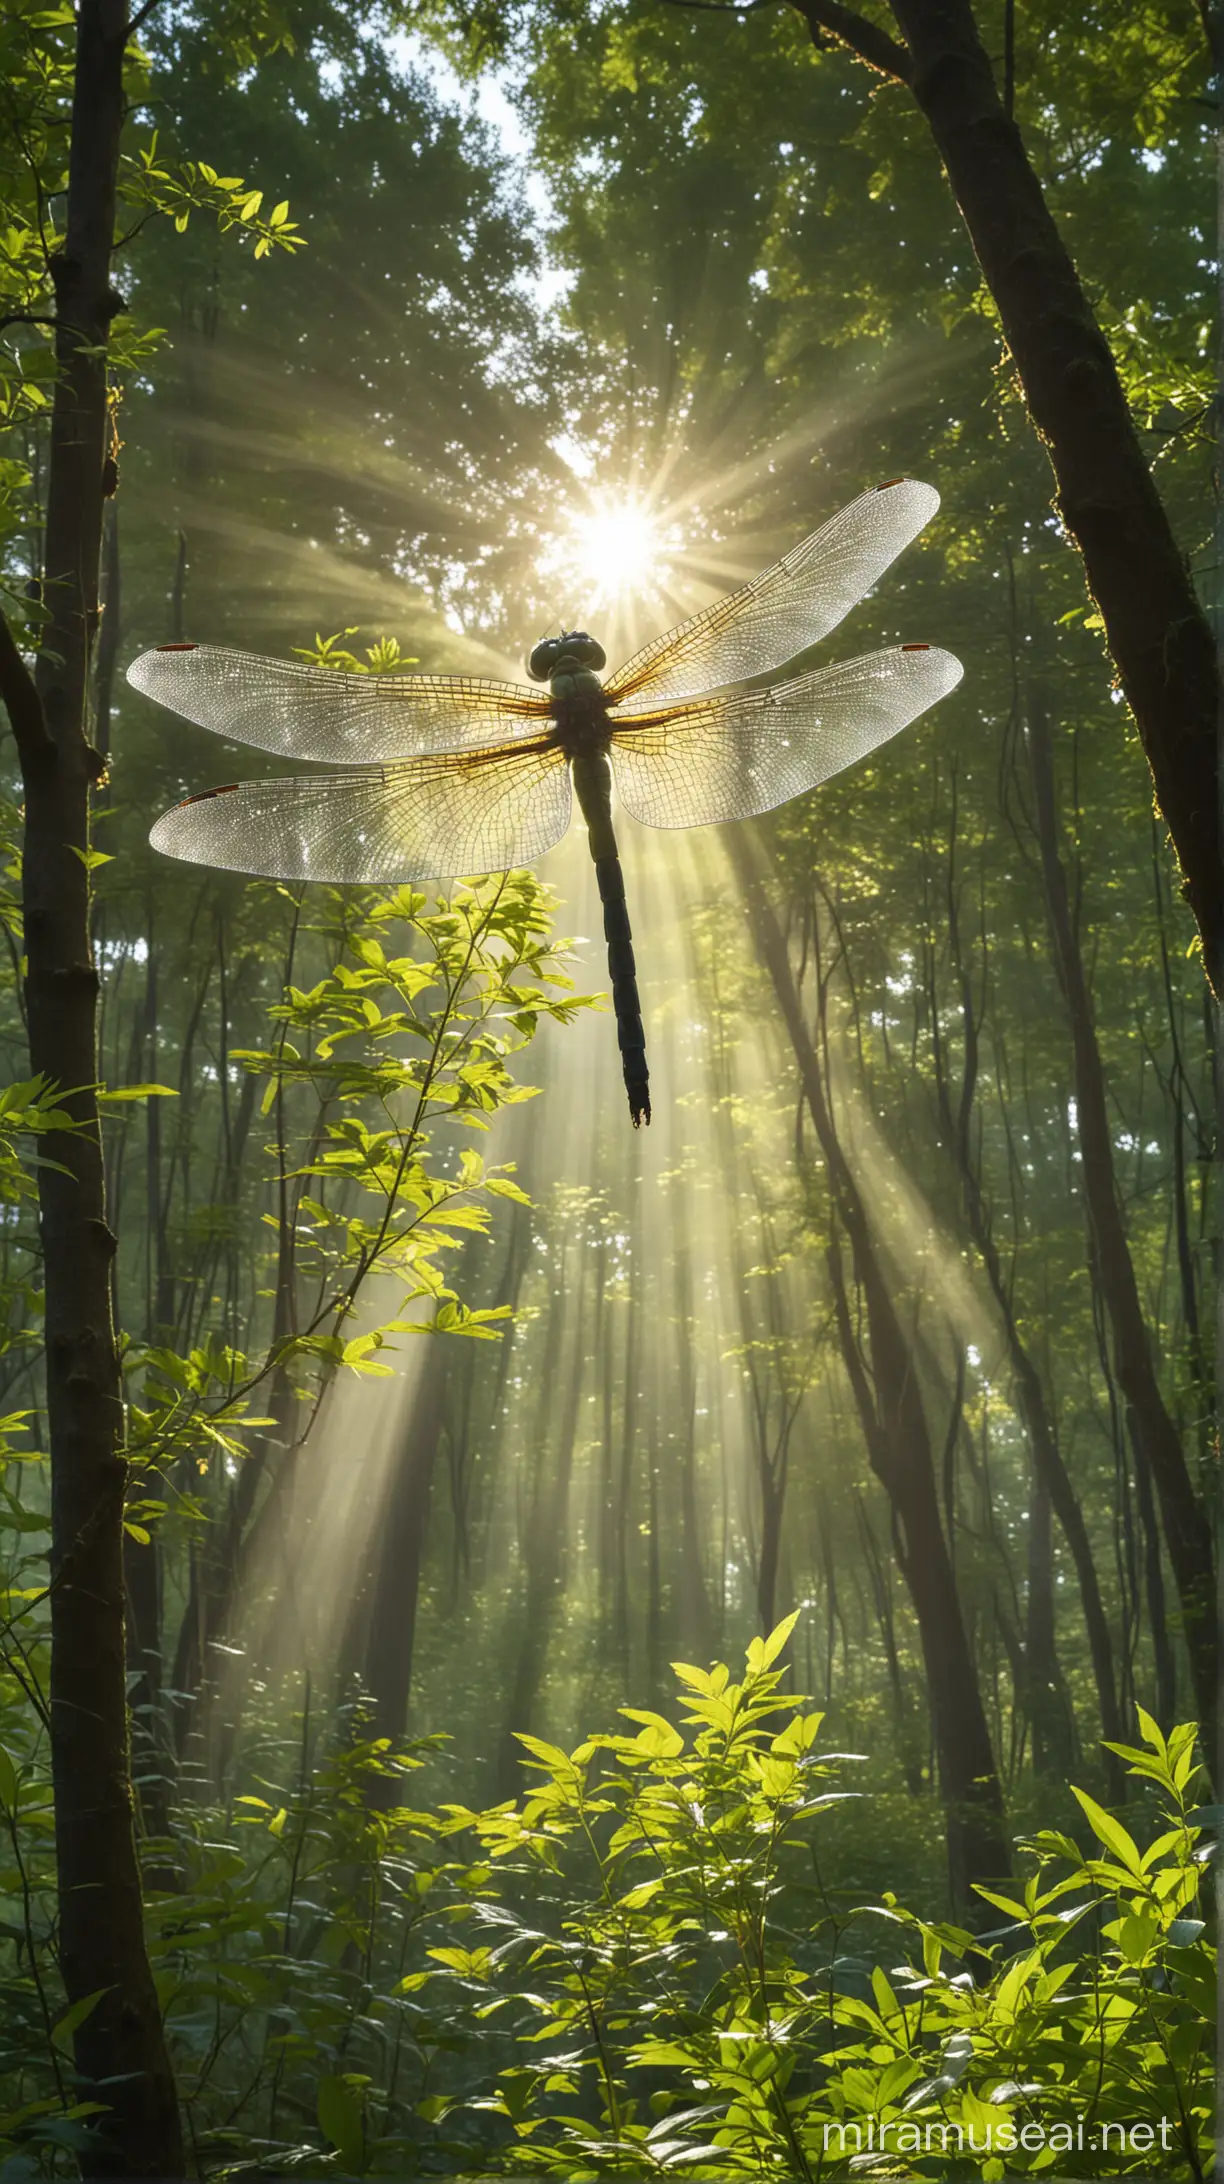 Enchanting Giant Dragonfly Soaring Through Sunlit Forest Canopy